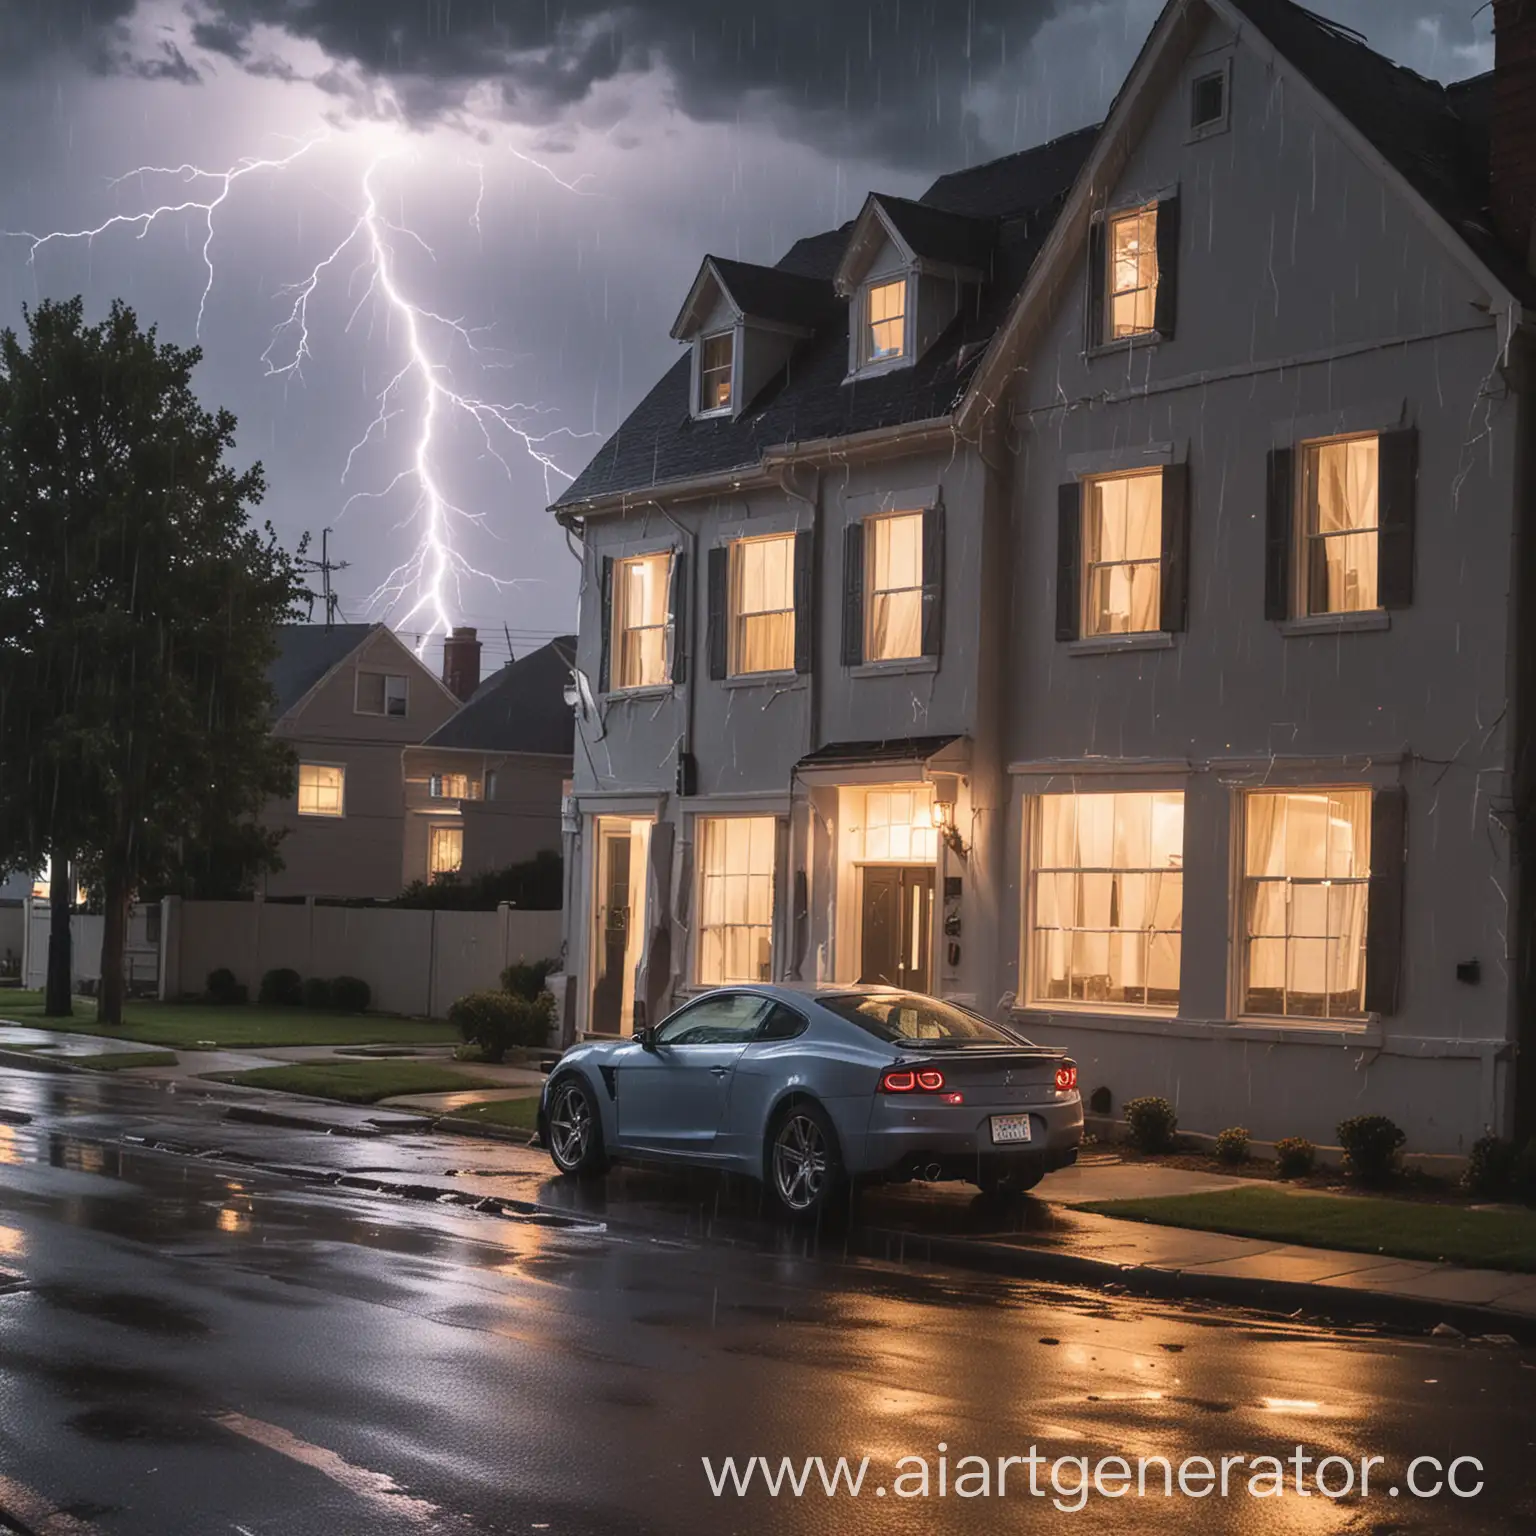 Man-Counting-Bills-by-Expensive-Car-under-Lightning-Strike